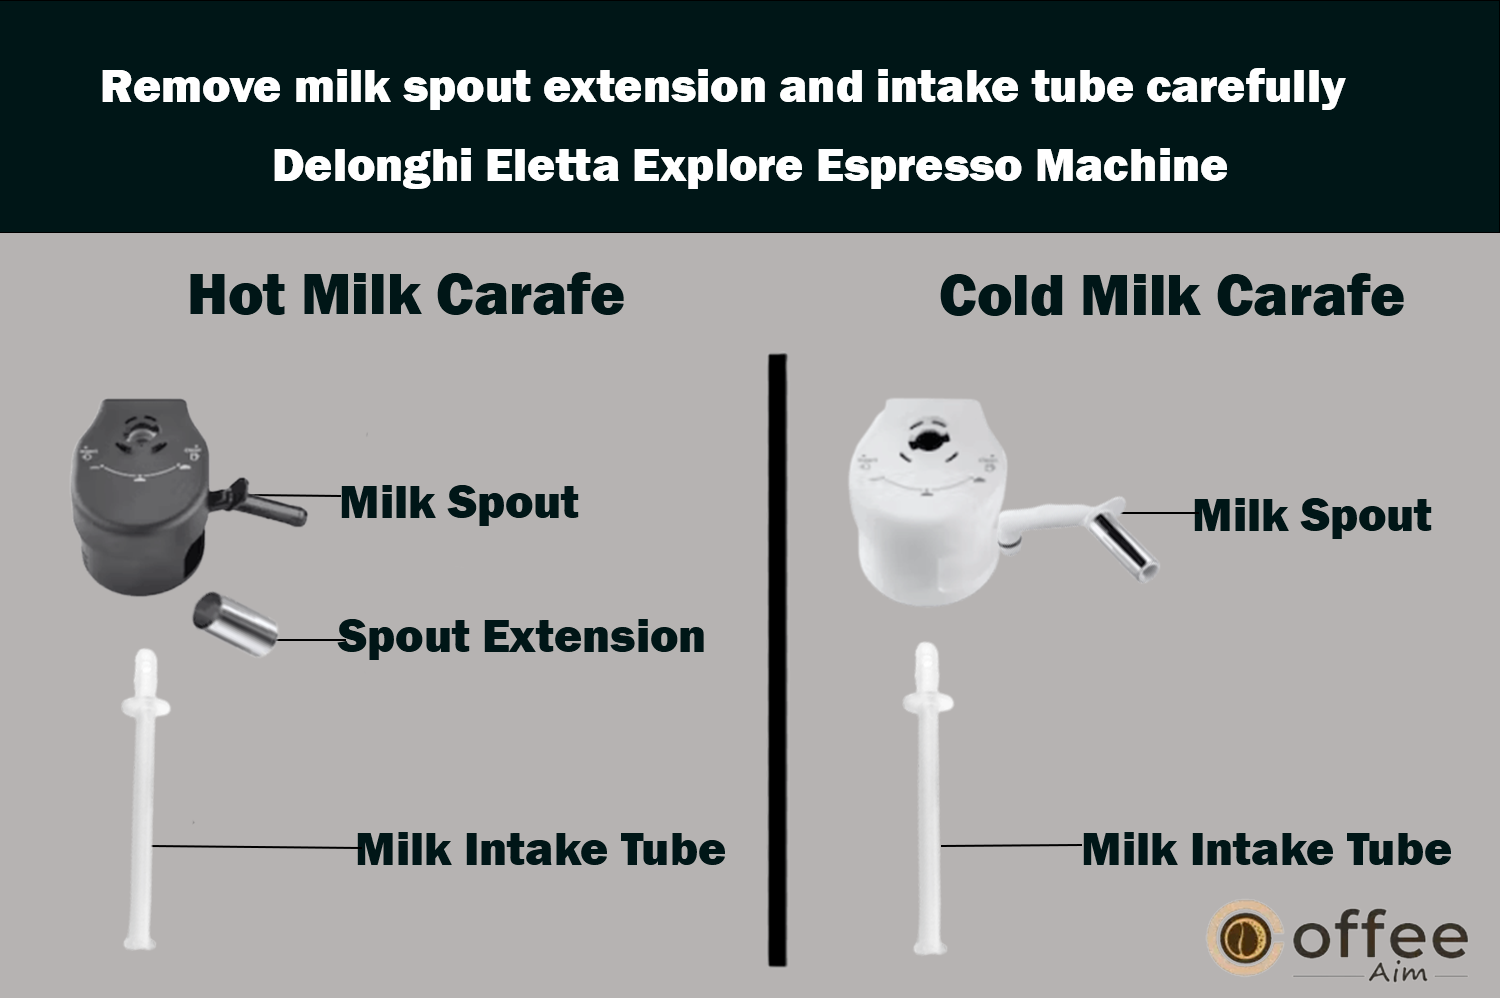 The image provides instructions to carefully remove the milk spout, the milk spout extension (for the 'Hot' carafe only), and the milk intake tube from the "Delonghi Eletta Explore Espresso Machine," as outlined in the article "How to Use the Delonghi Eletta Explore Espresso Machine?"